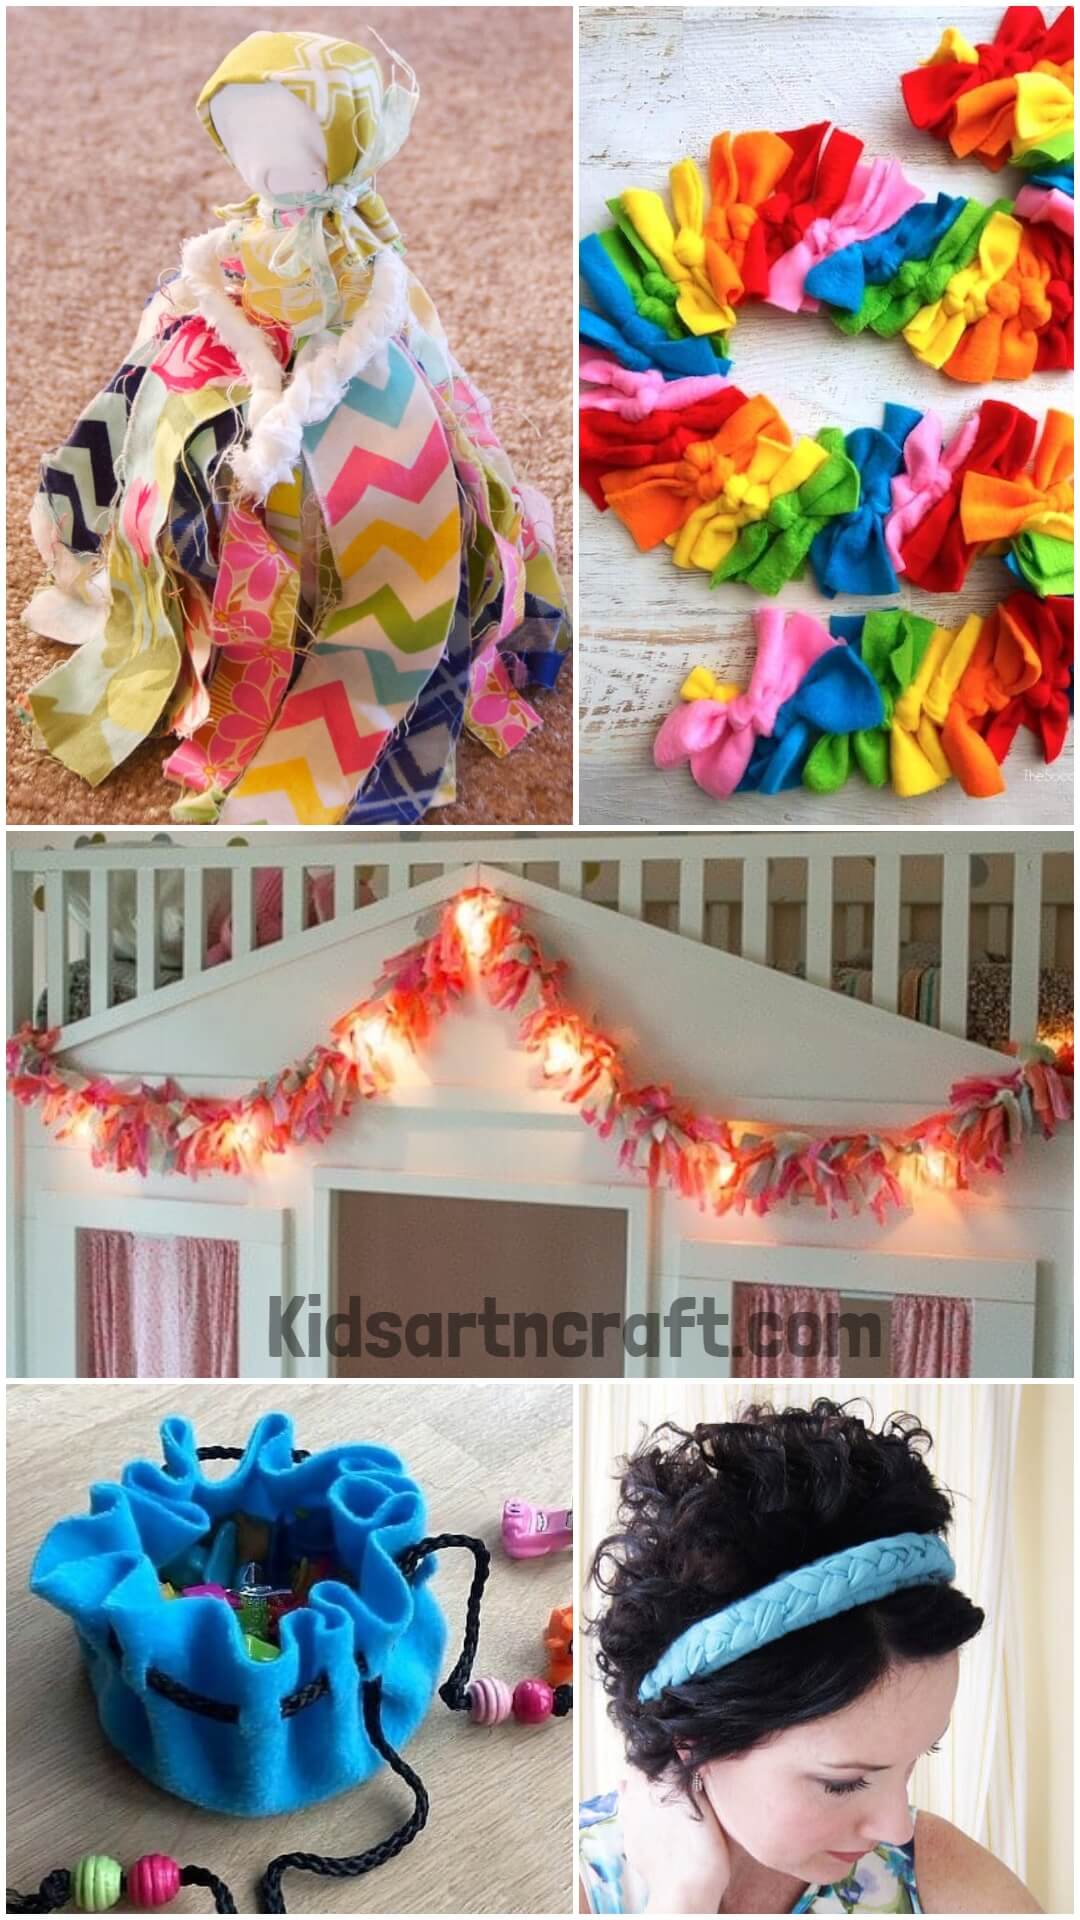 No-Sew Crafts With Fabric Scraps